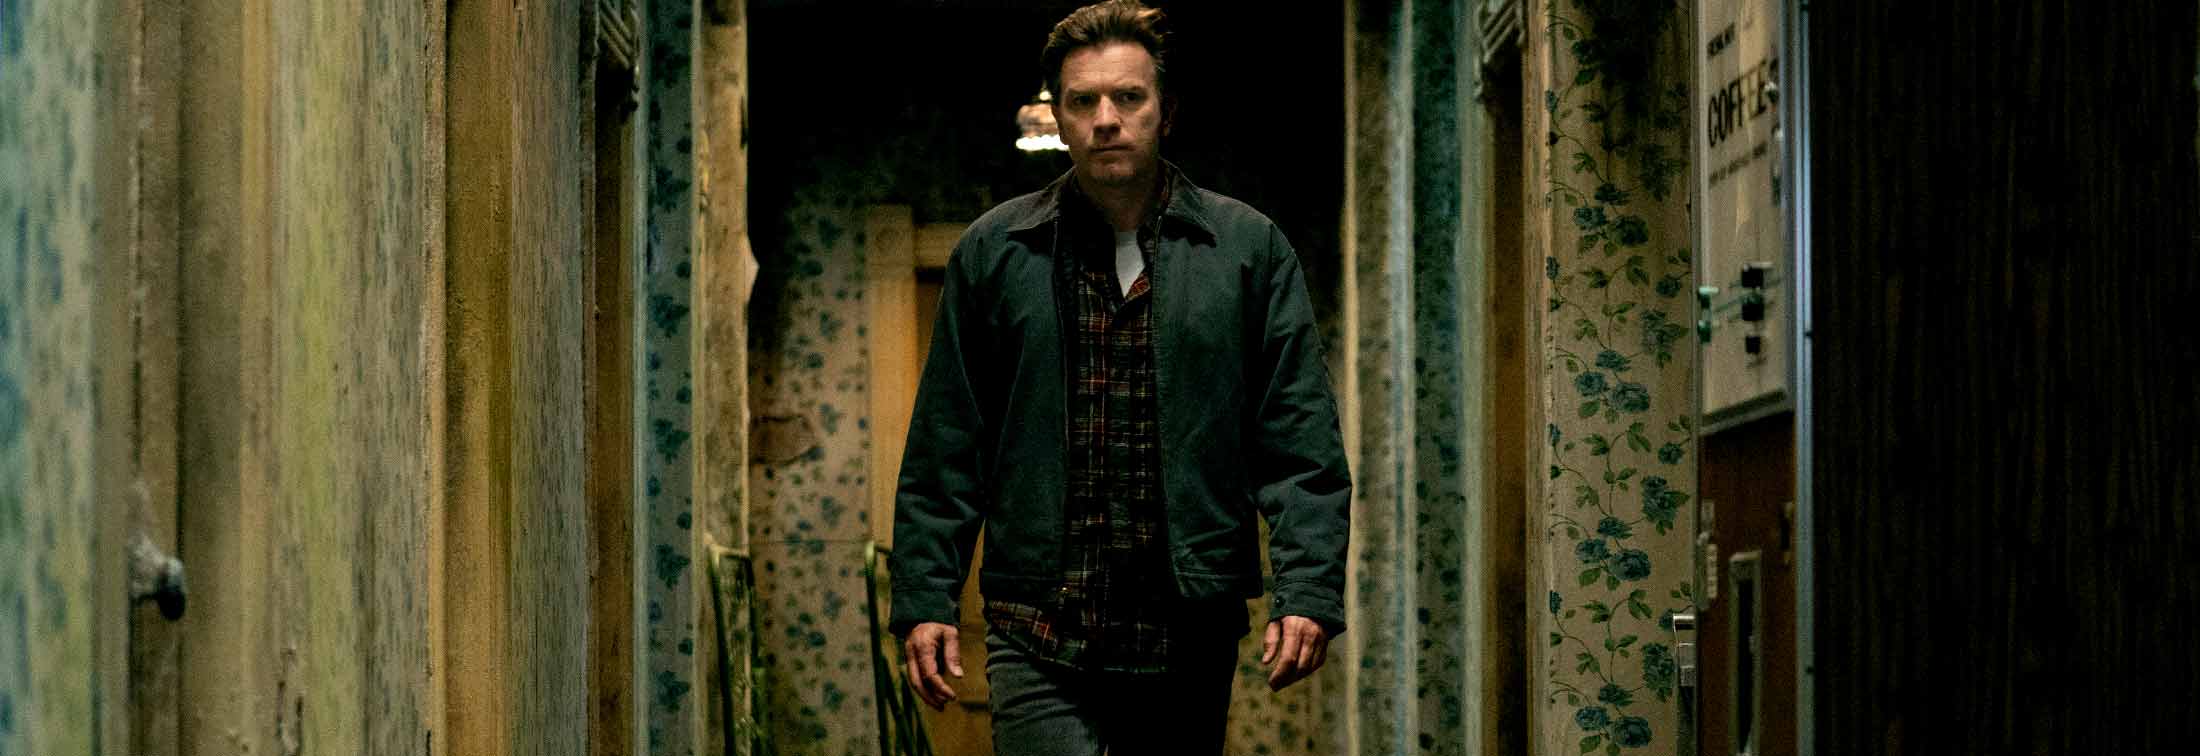 Doctor Sleep - Here’s 'The Shining' Stephen King has been waiting for